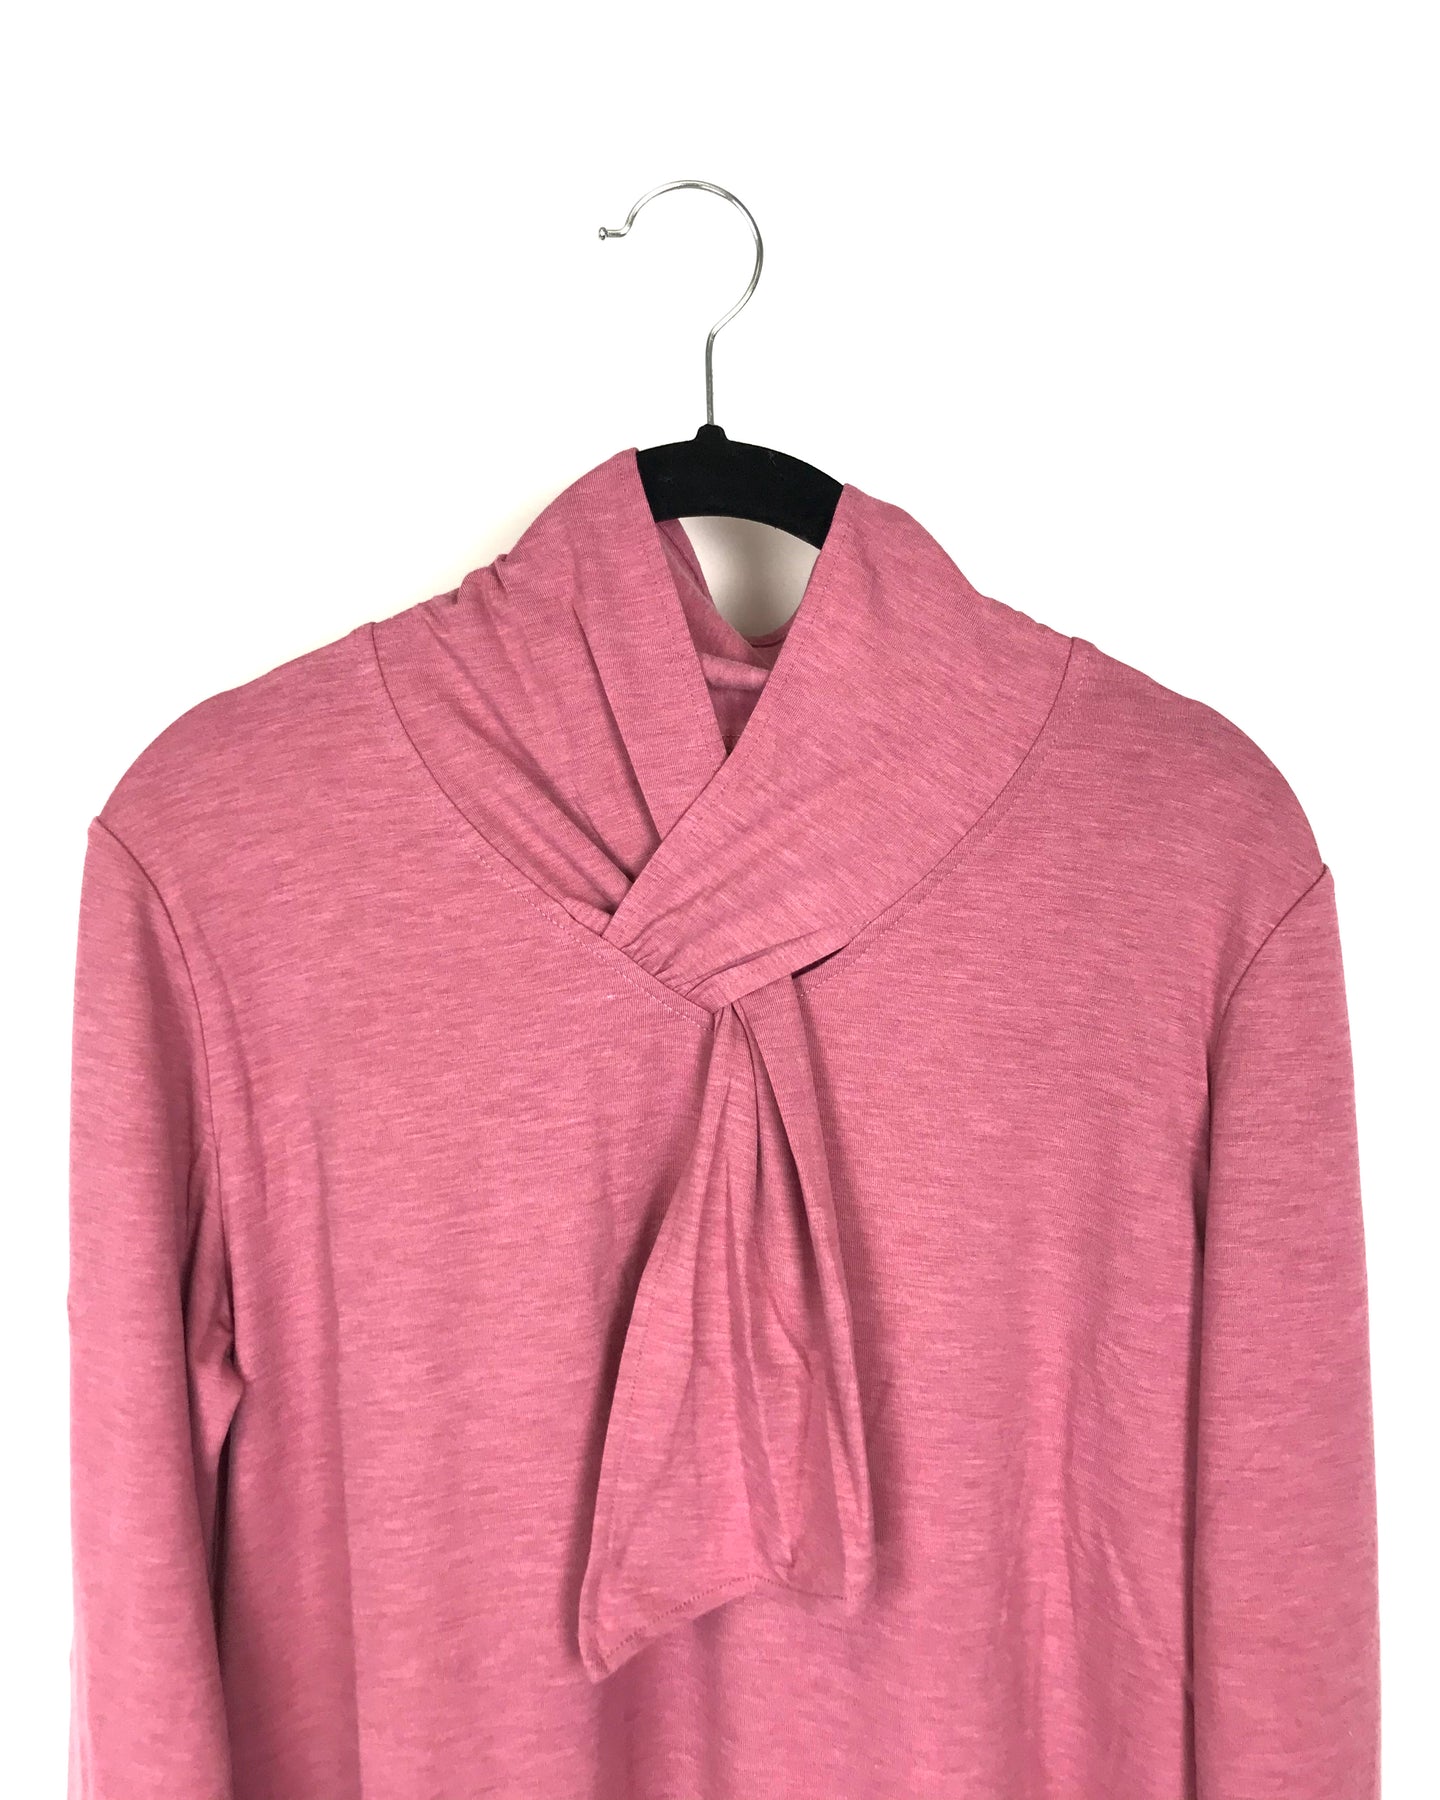 Long Sleeve Pink Top - Extra Small and Small – The Fashion Foundation